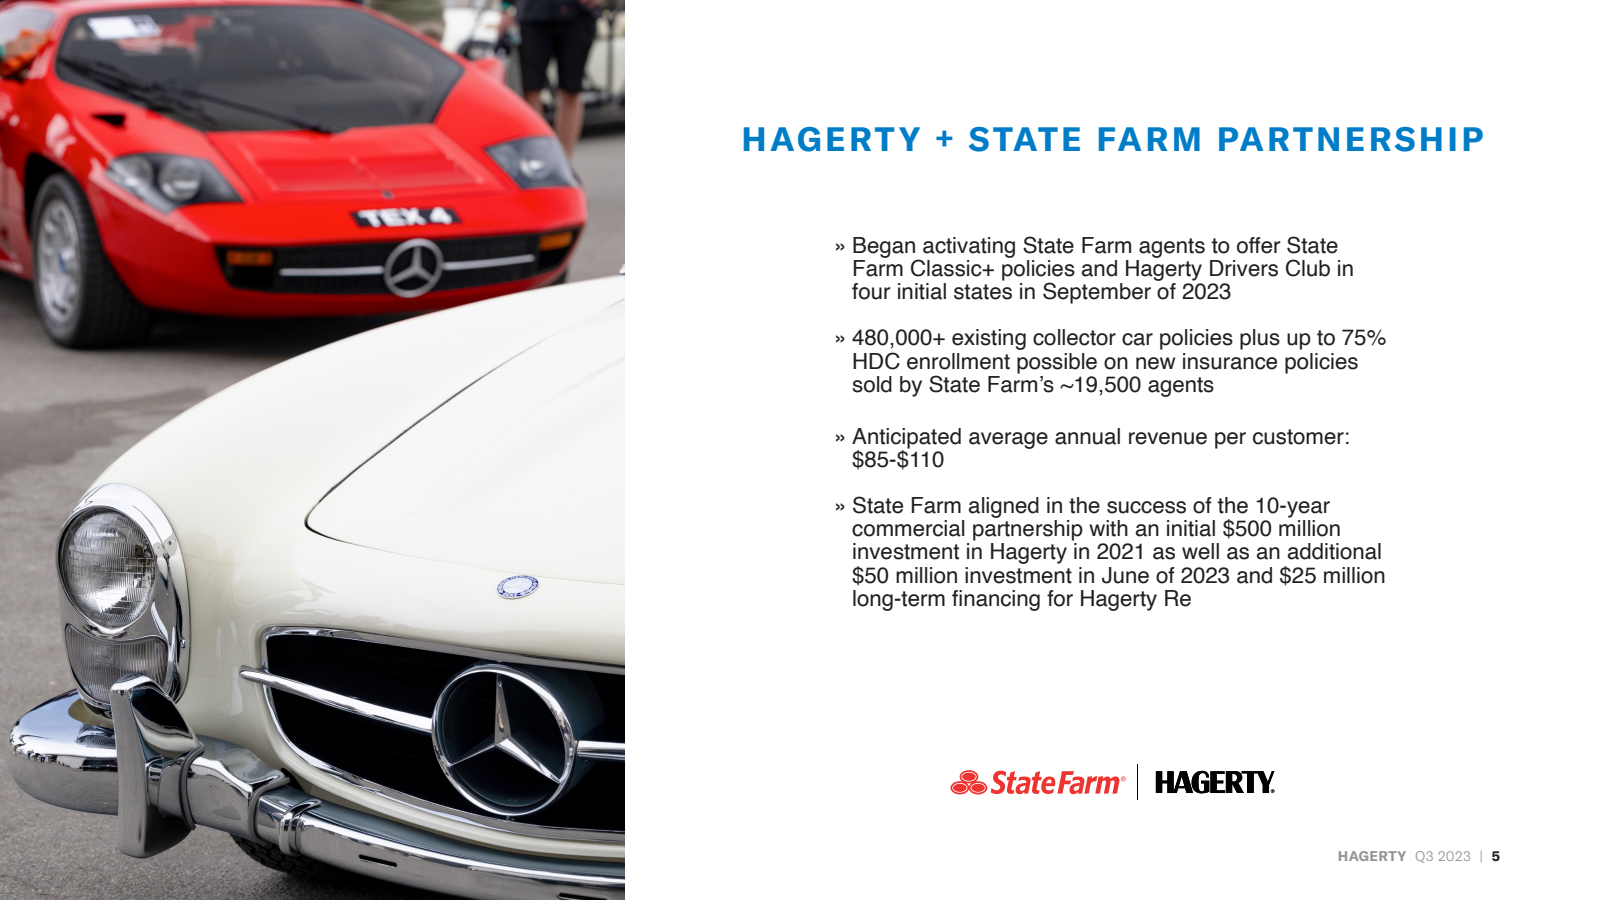 HAGERTY + STATE FARM